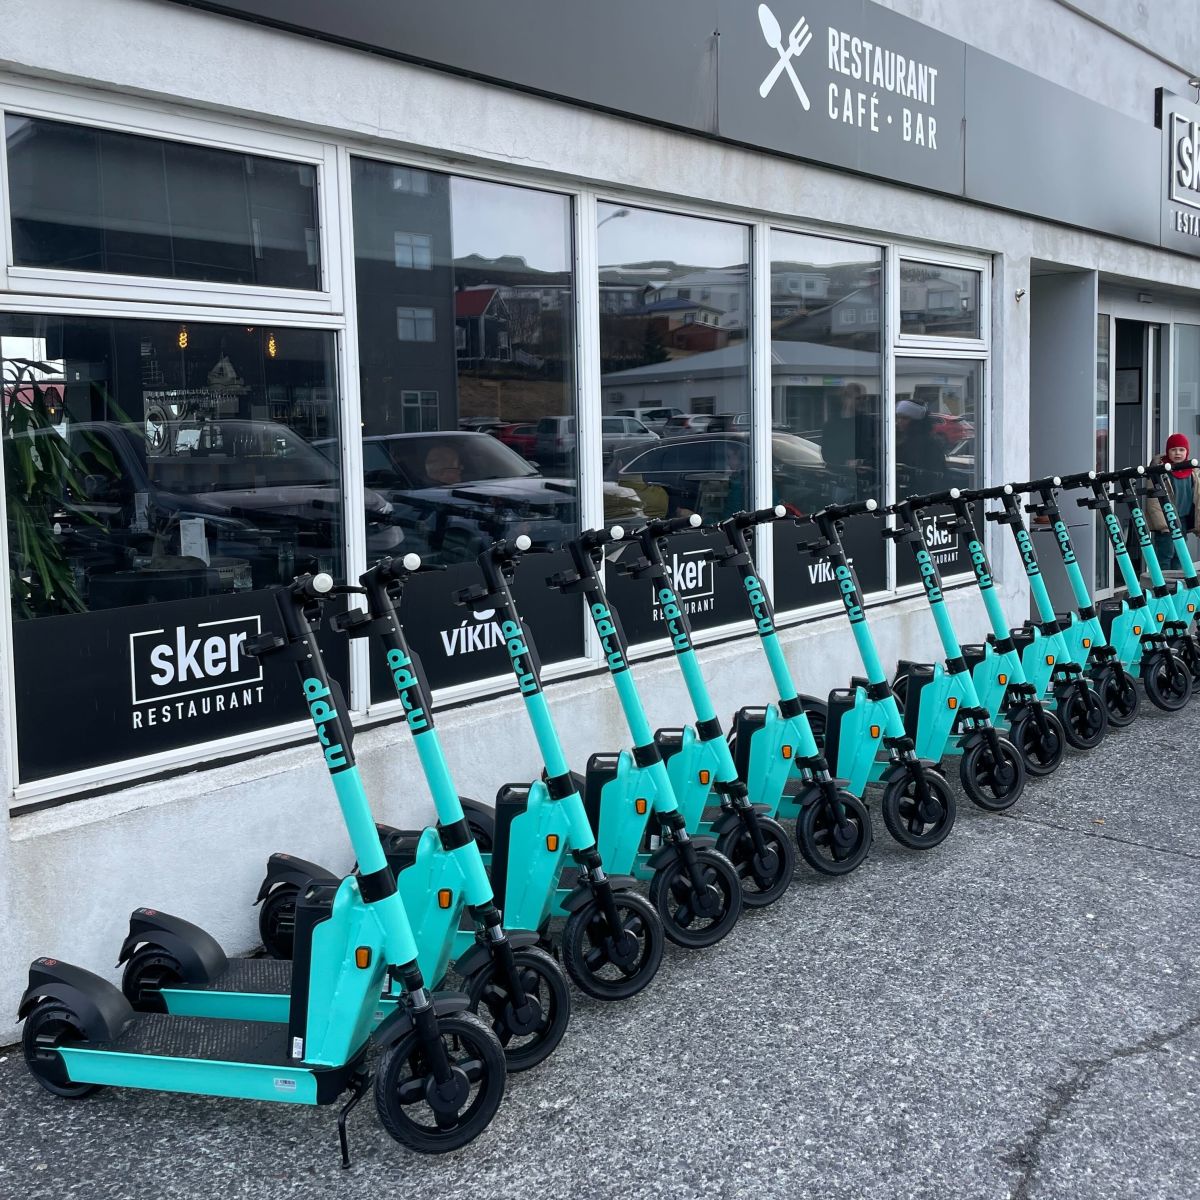 Ólafsvík's fleet of 30+ scooters can be found around this historically important town. Once an epicentre for trade with Denmark, It's now famed for its bird watching, hiking and sandy beaches - all near the glacier capped volcano Snæfellsjökull.